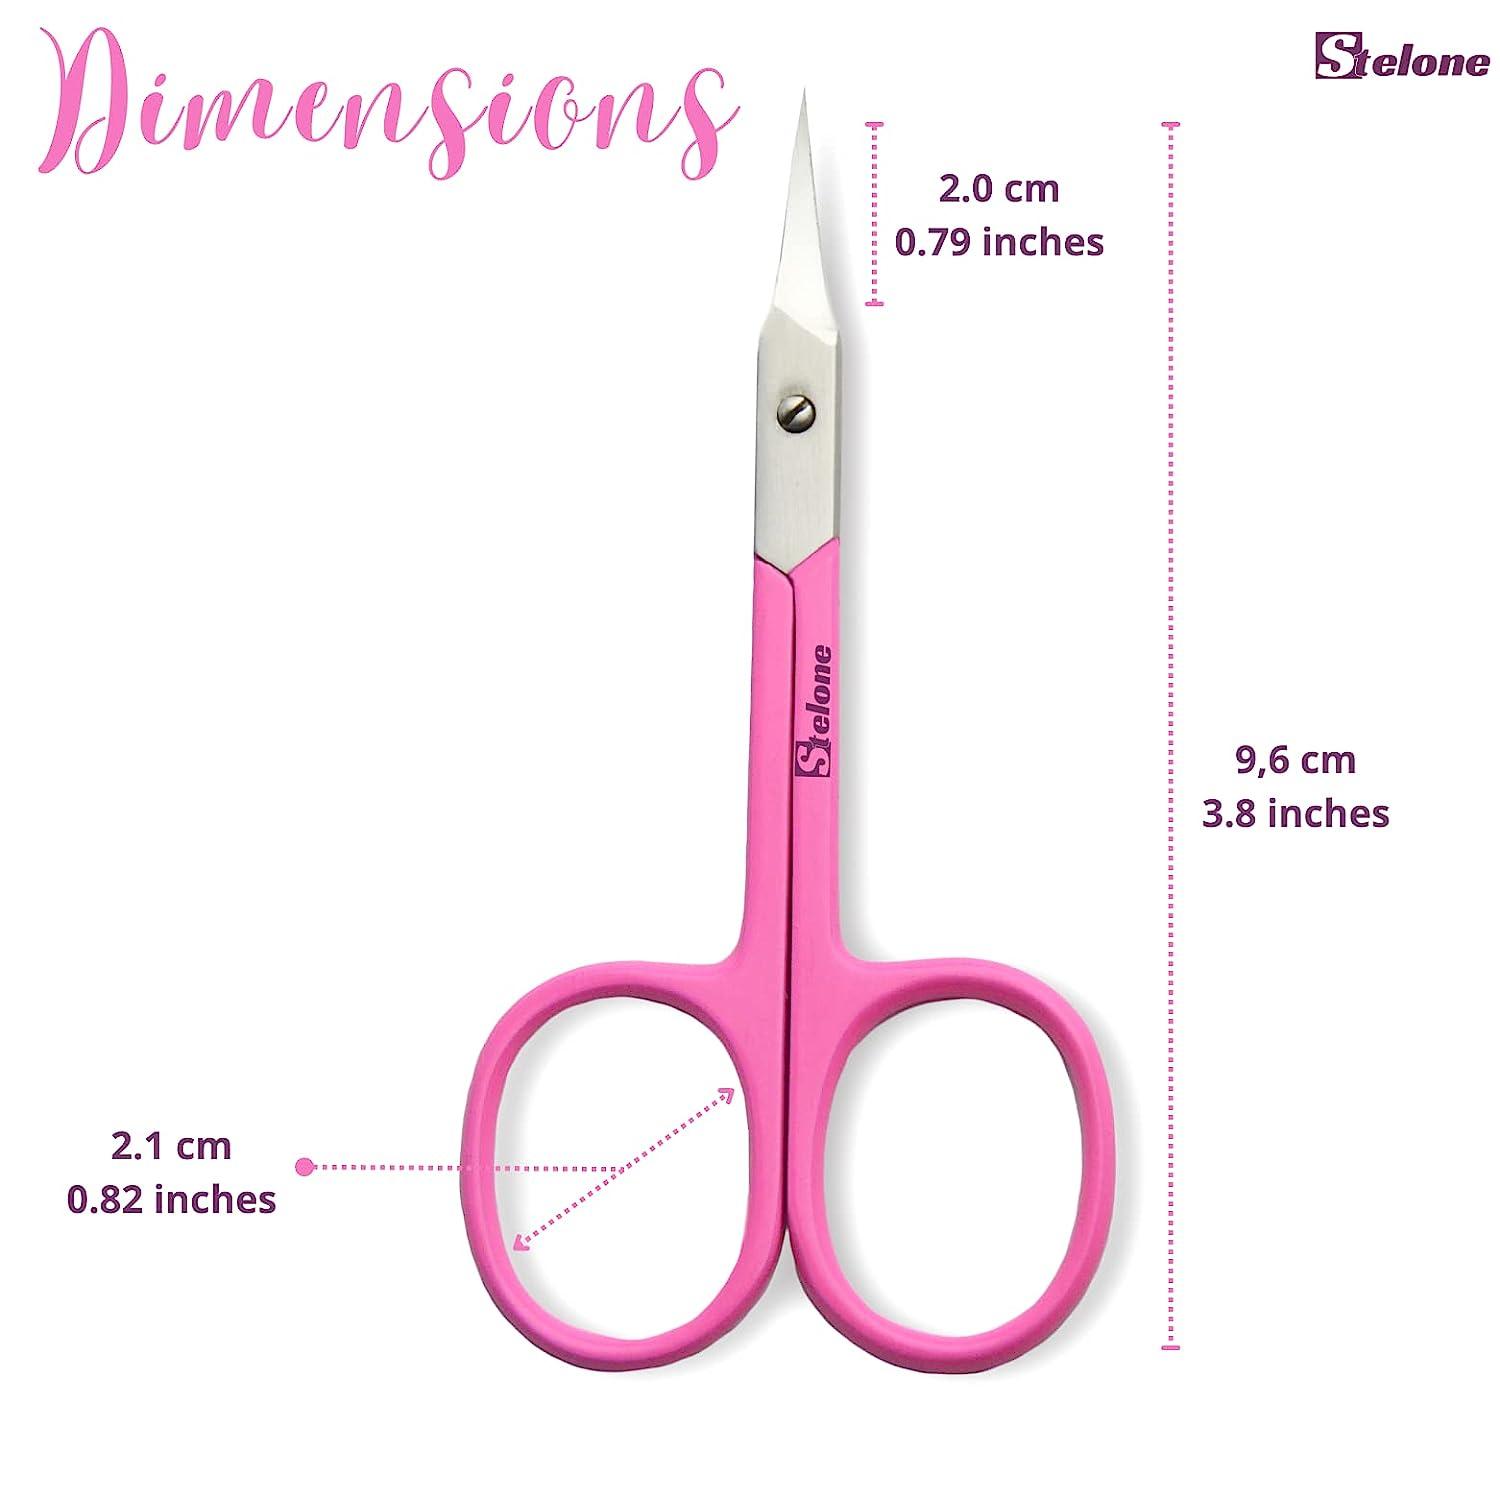 Stelone Premium Cuticle Scissors - Small Curved Stainless Steel Manicure &  Beauty Scissor for Women